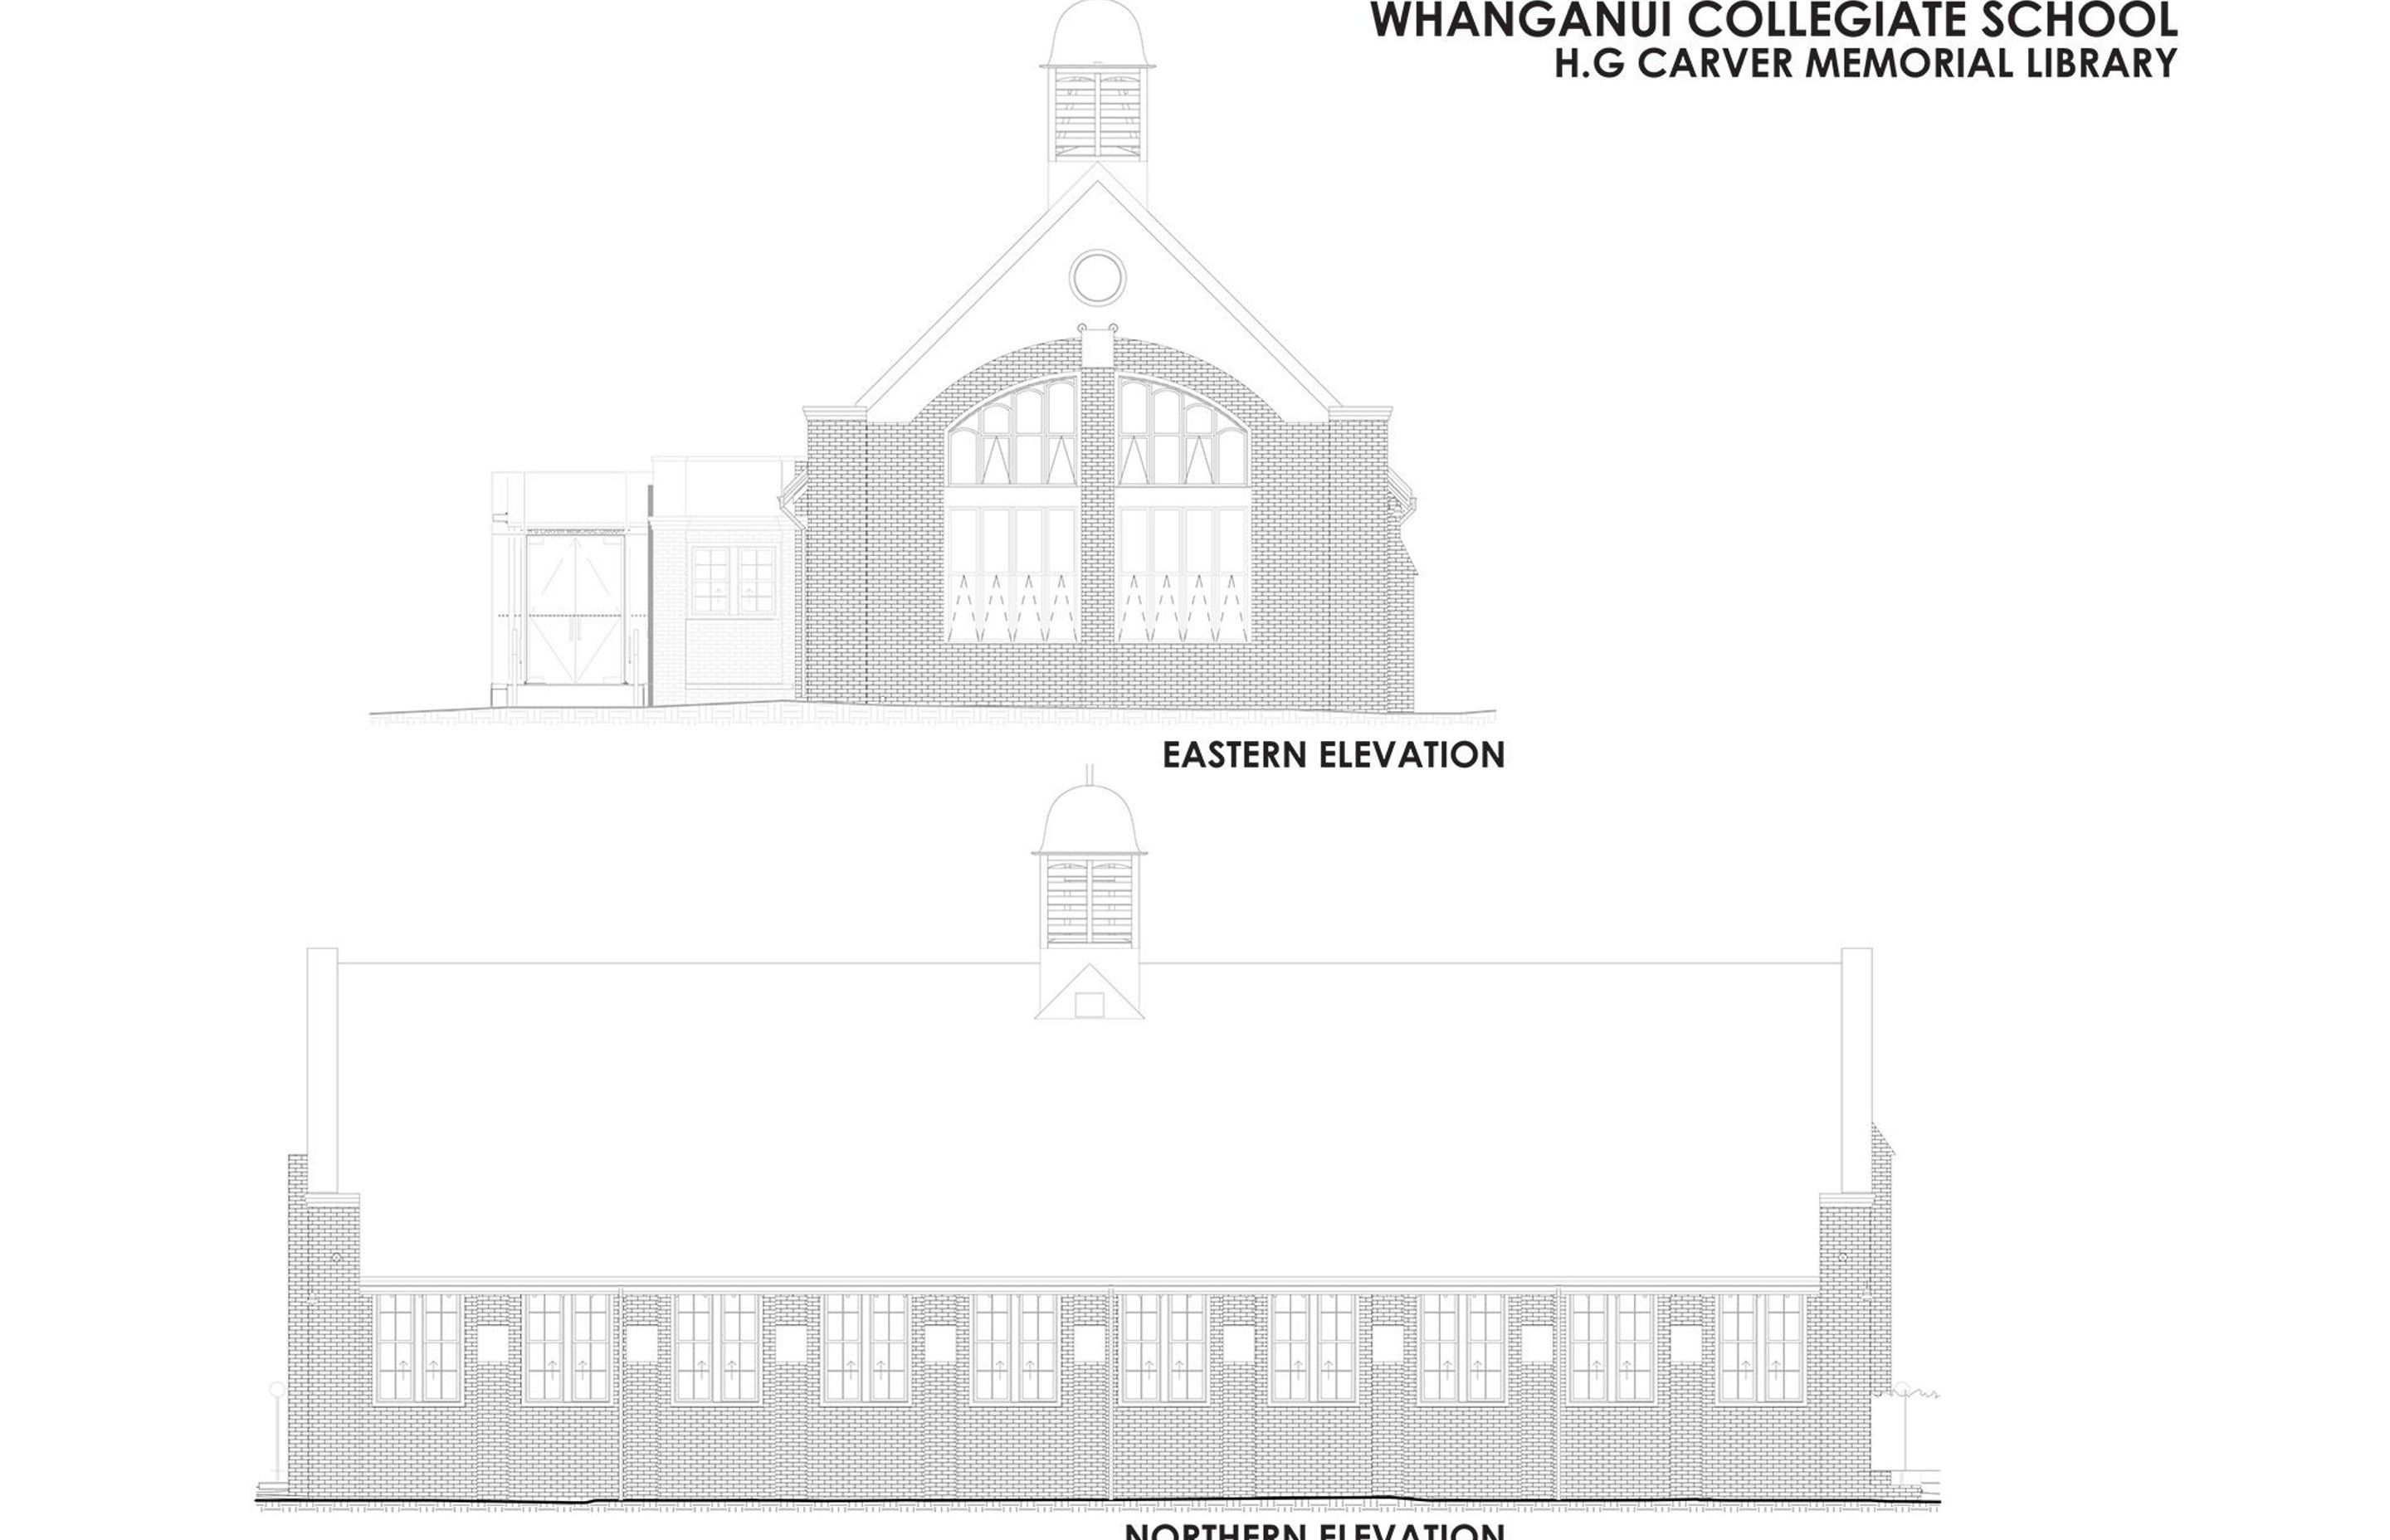 HG Carver Memorial Library: eastern and northern elevations. Drawing by RTA Studio.